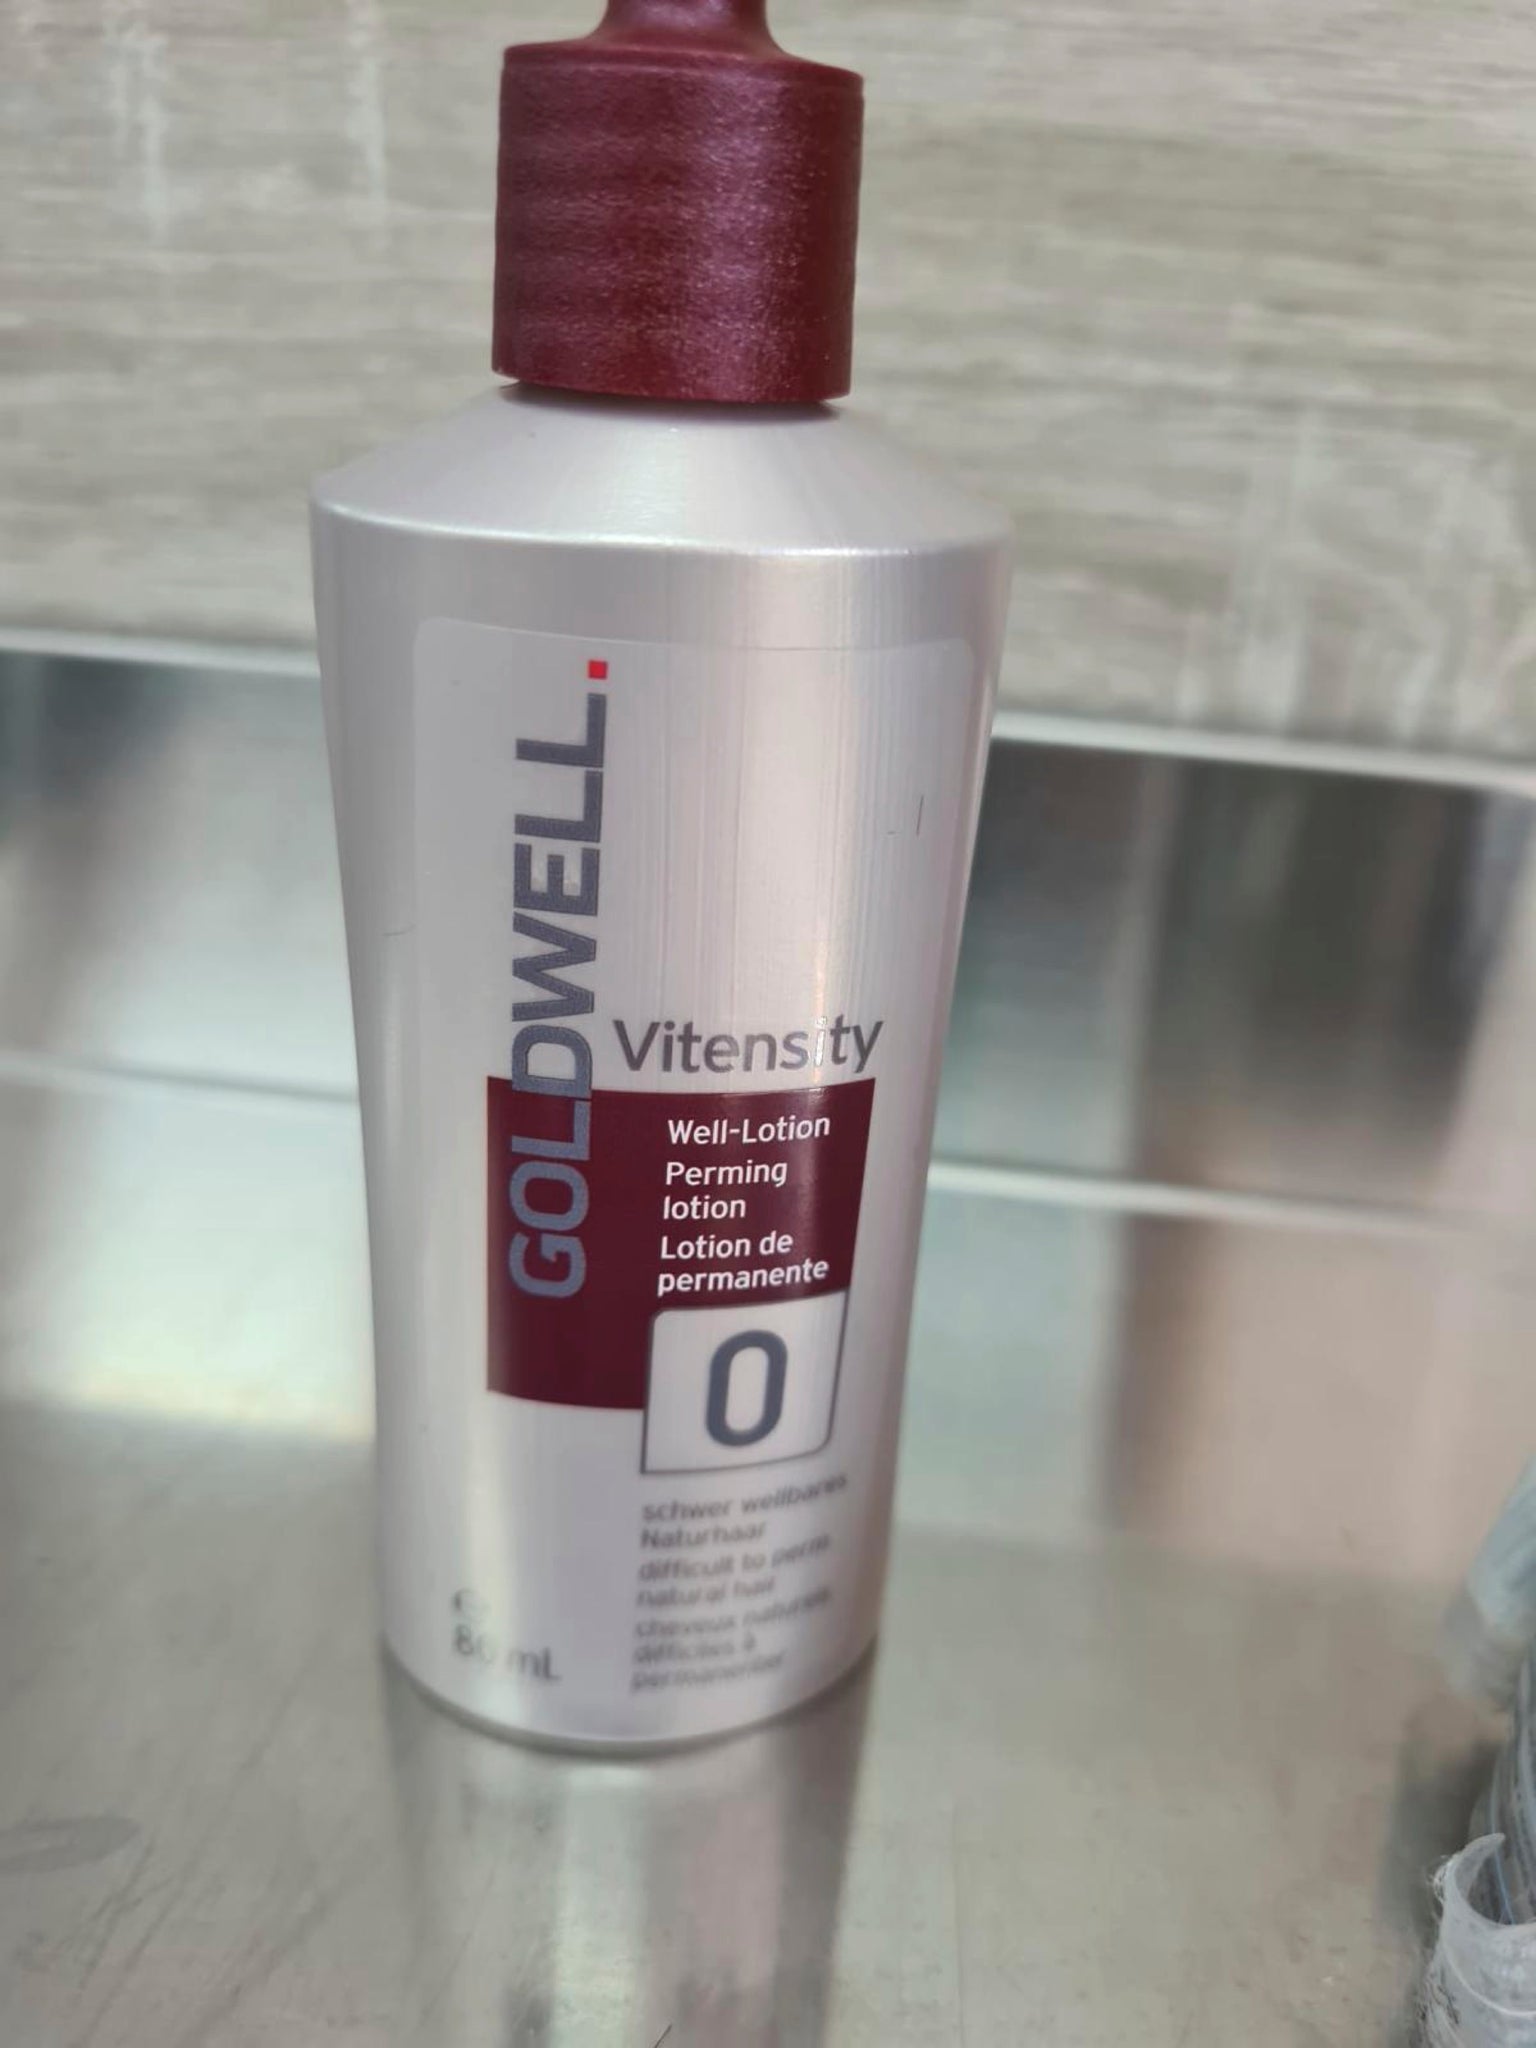 Goldwell Vitensity Well-Lotion No. 0